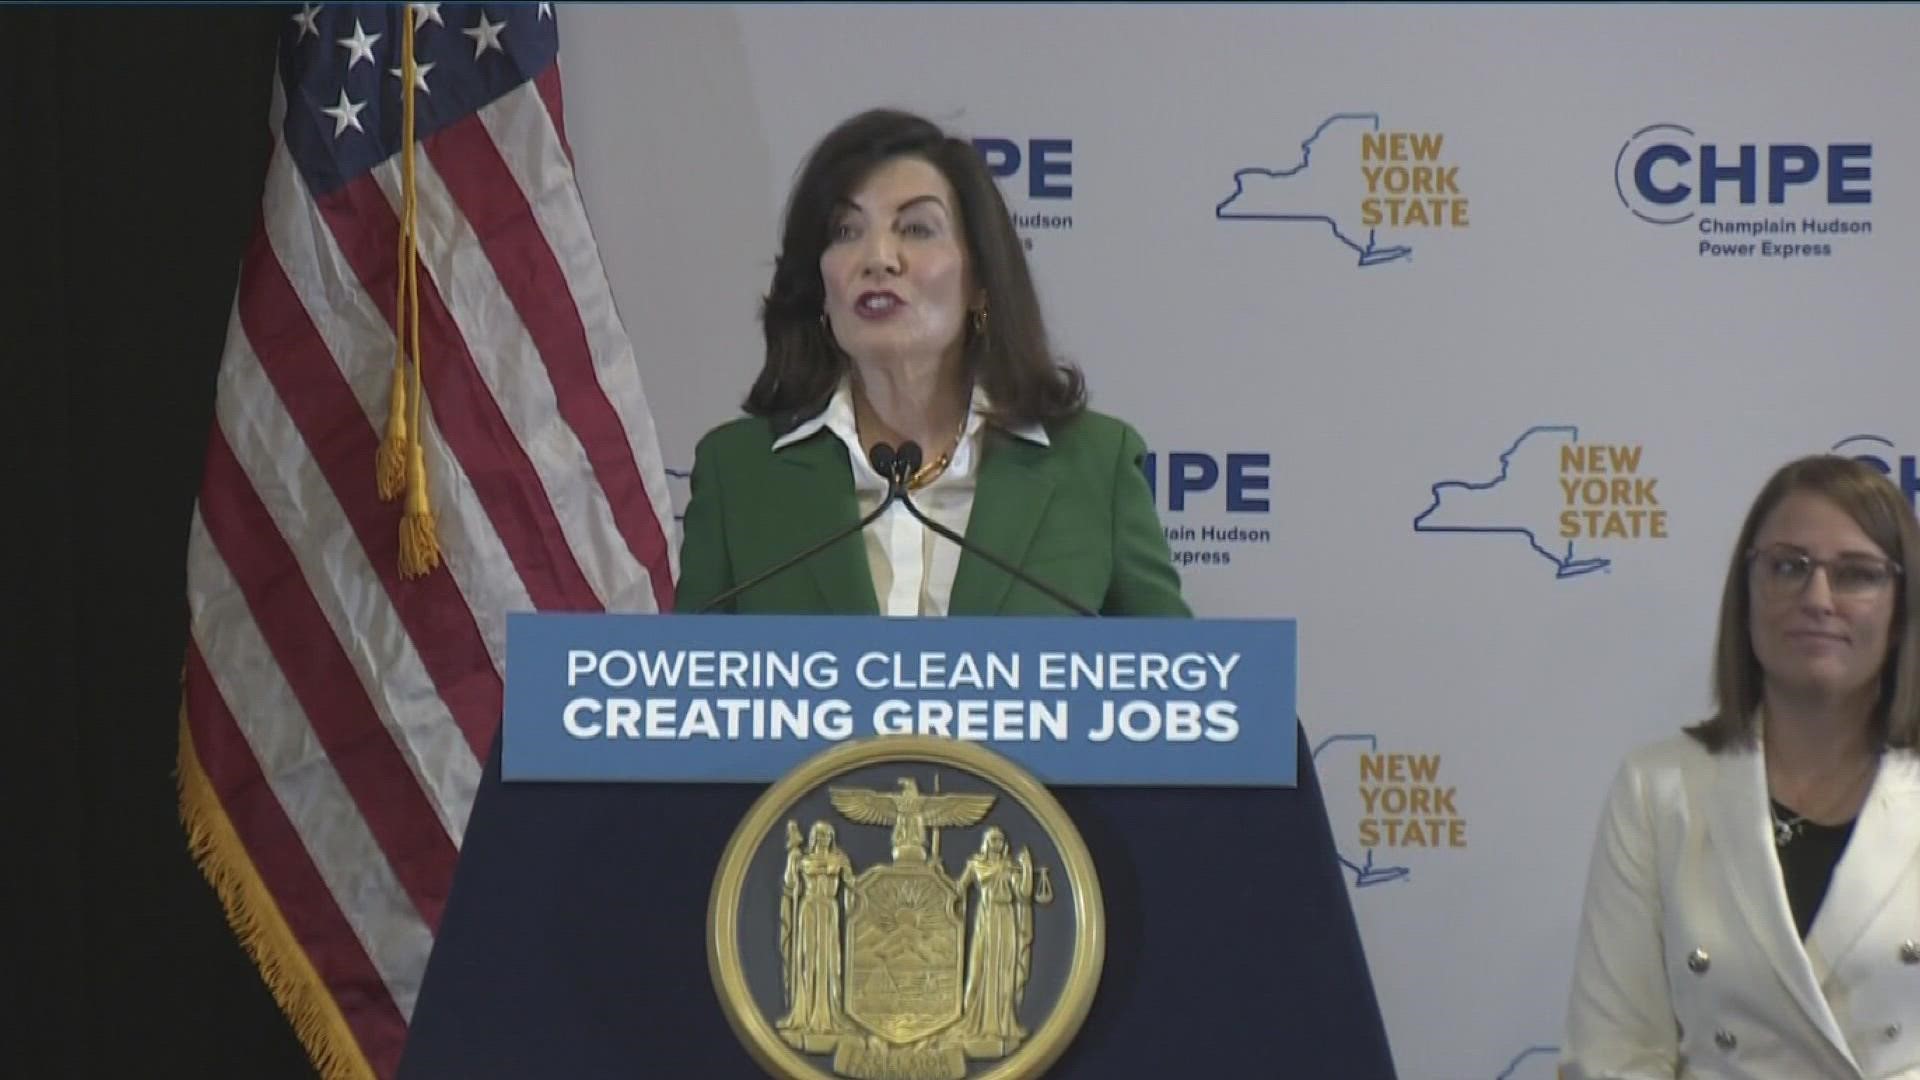 Governor Hochul said a big motivator for moving towards clean energy was climate change and extreme weather